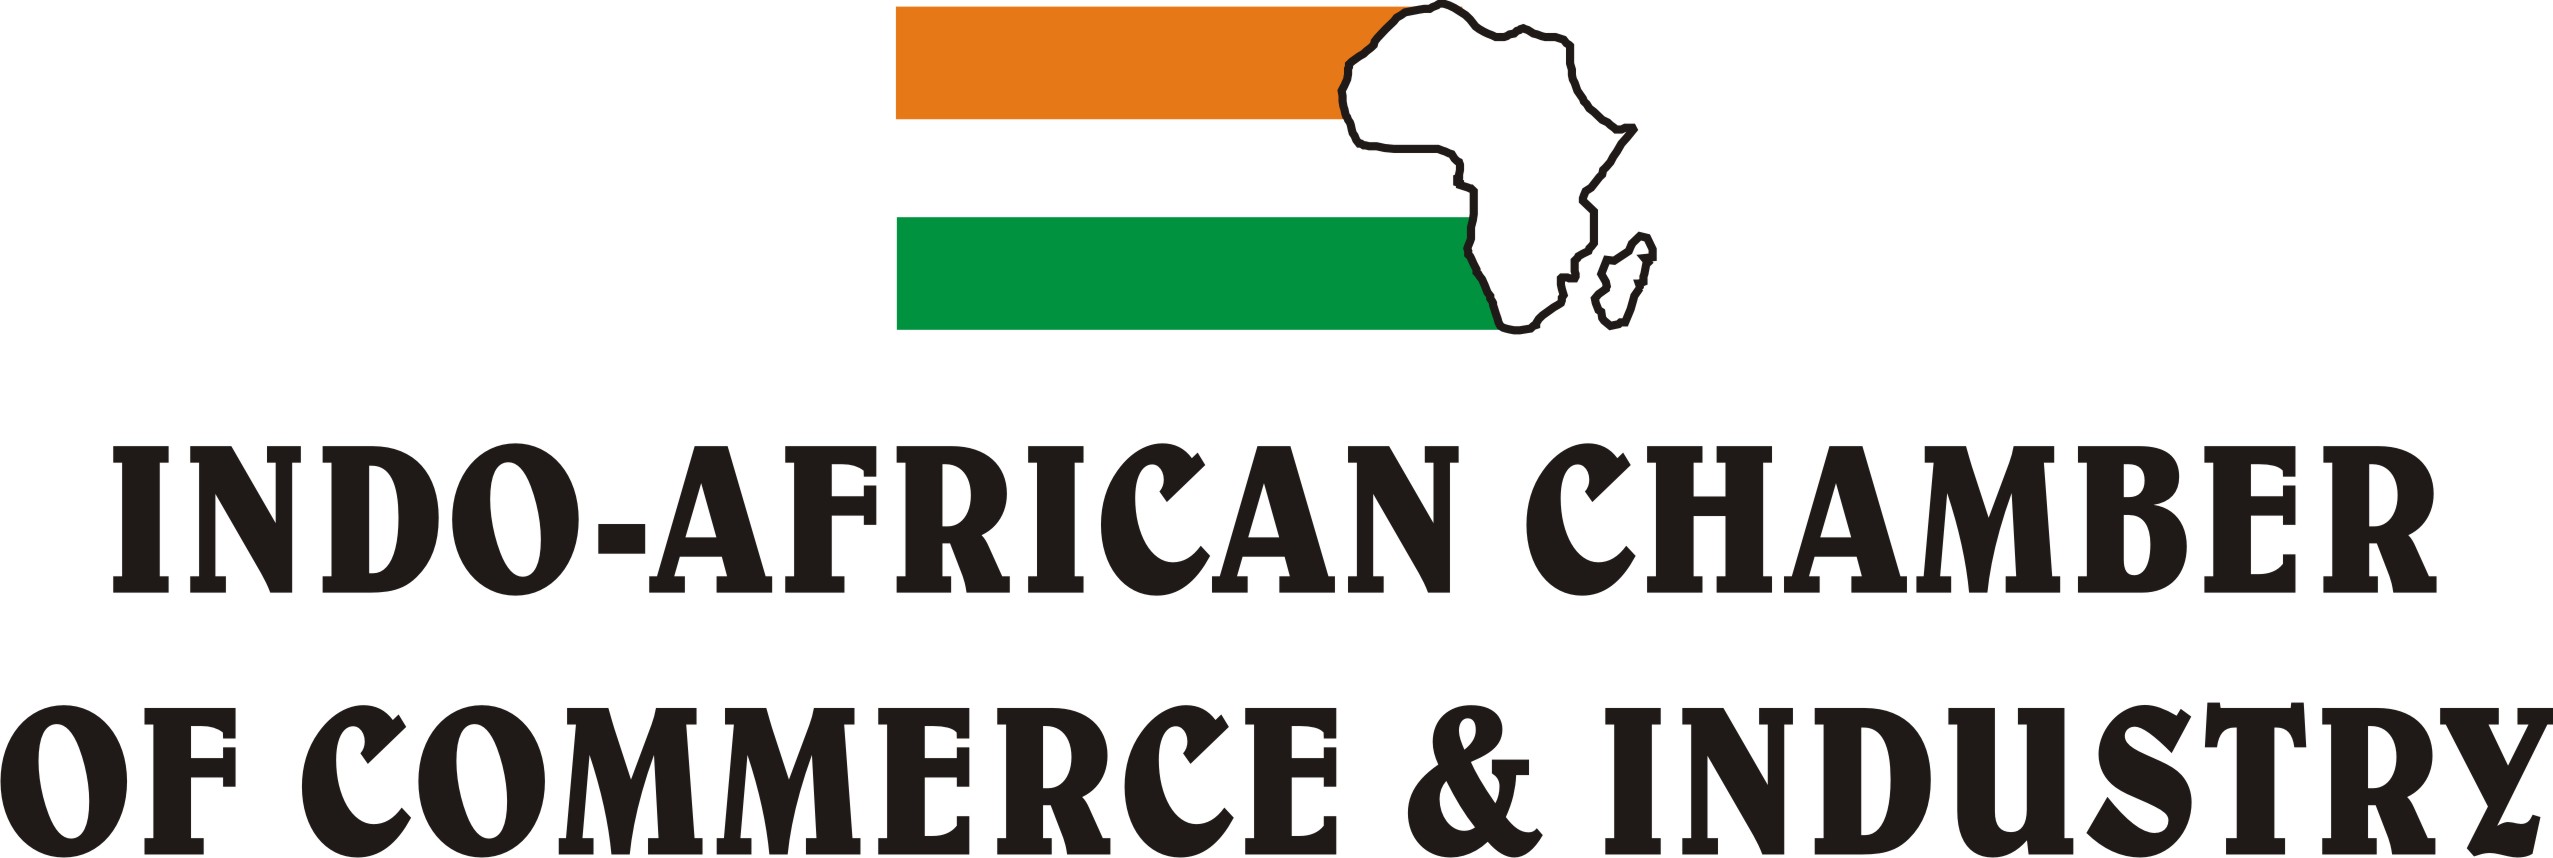 Indo-African Chamber of Commerce & Industry